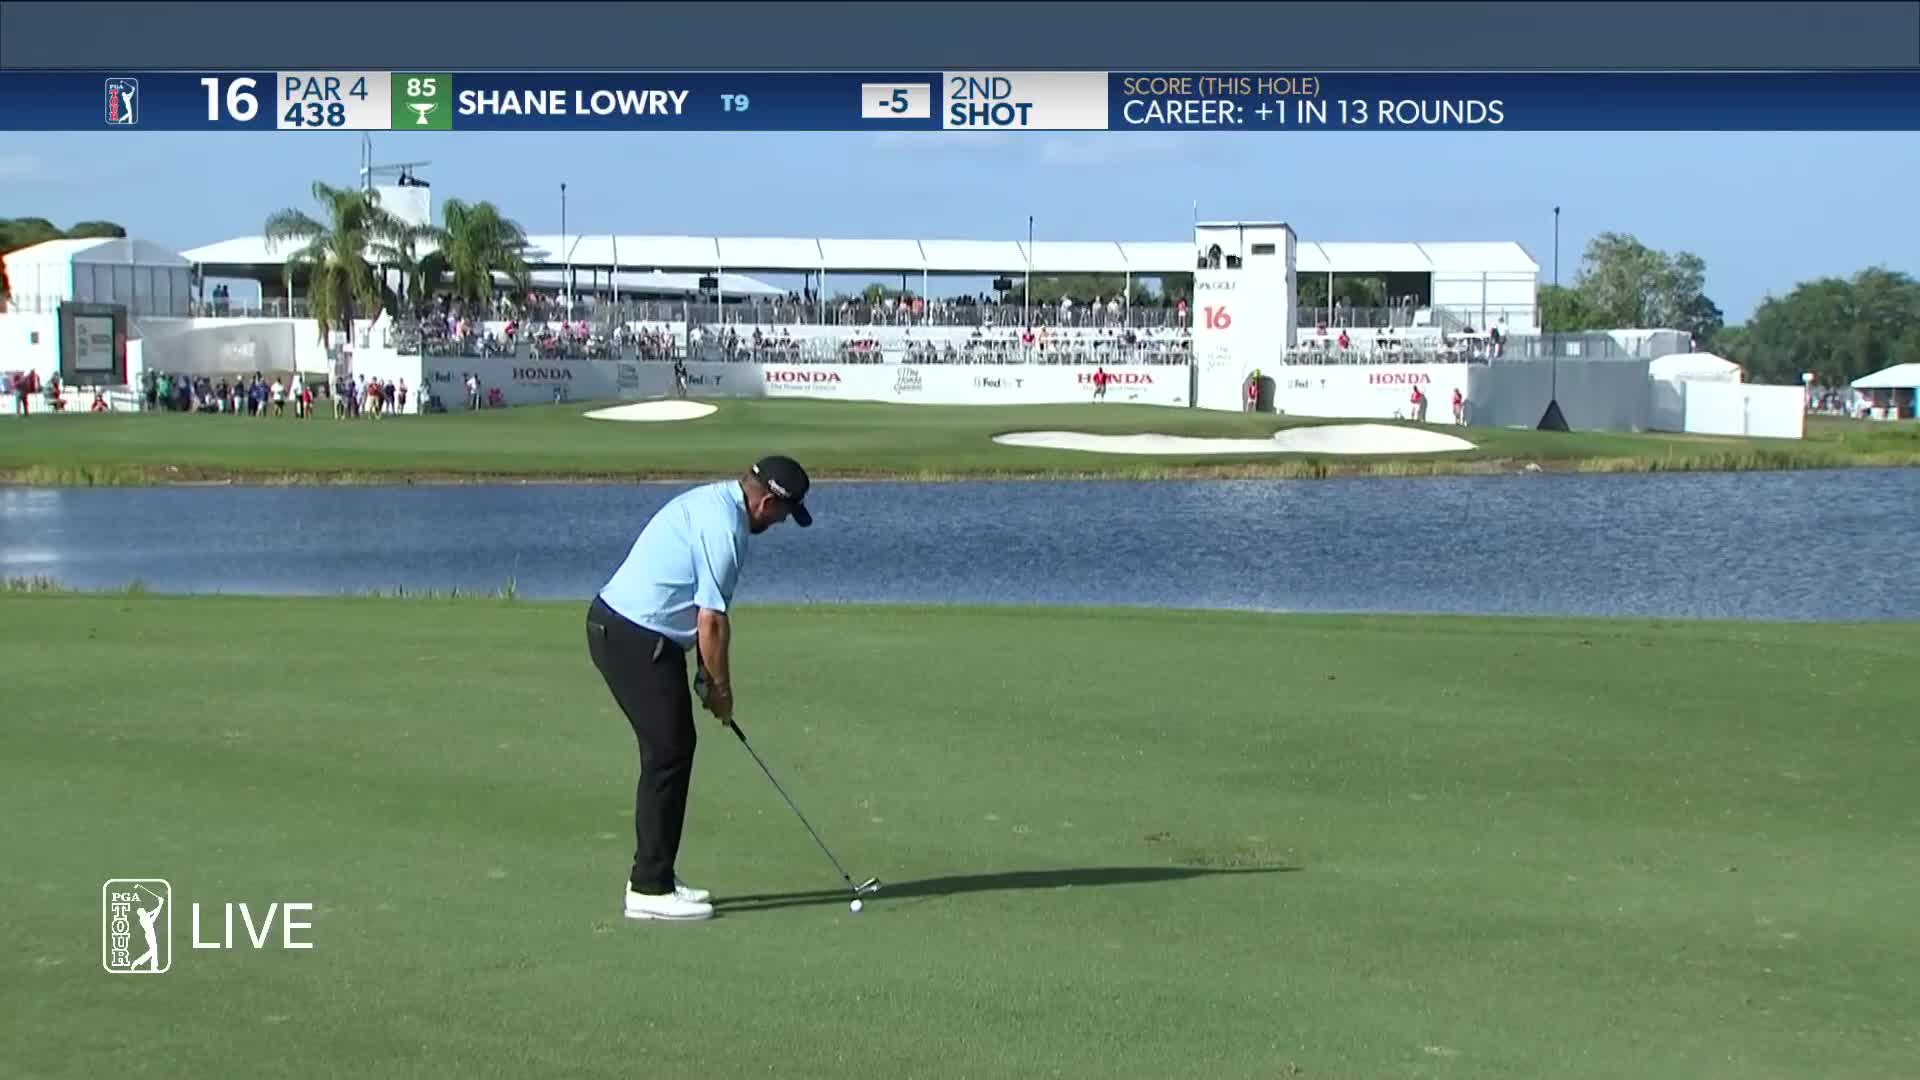 Shane Lowry stays dry and putts for birdie on No